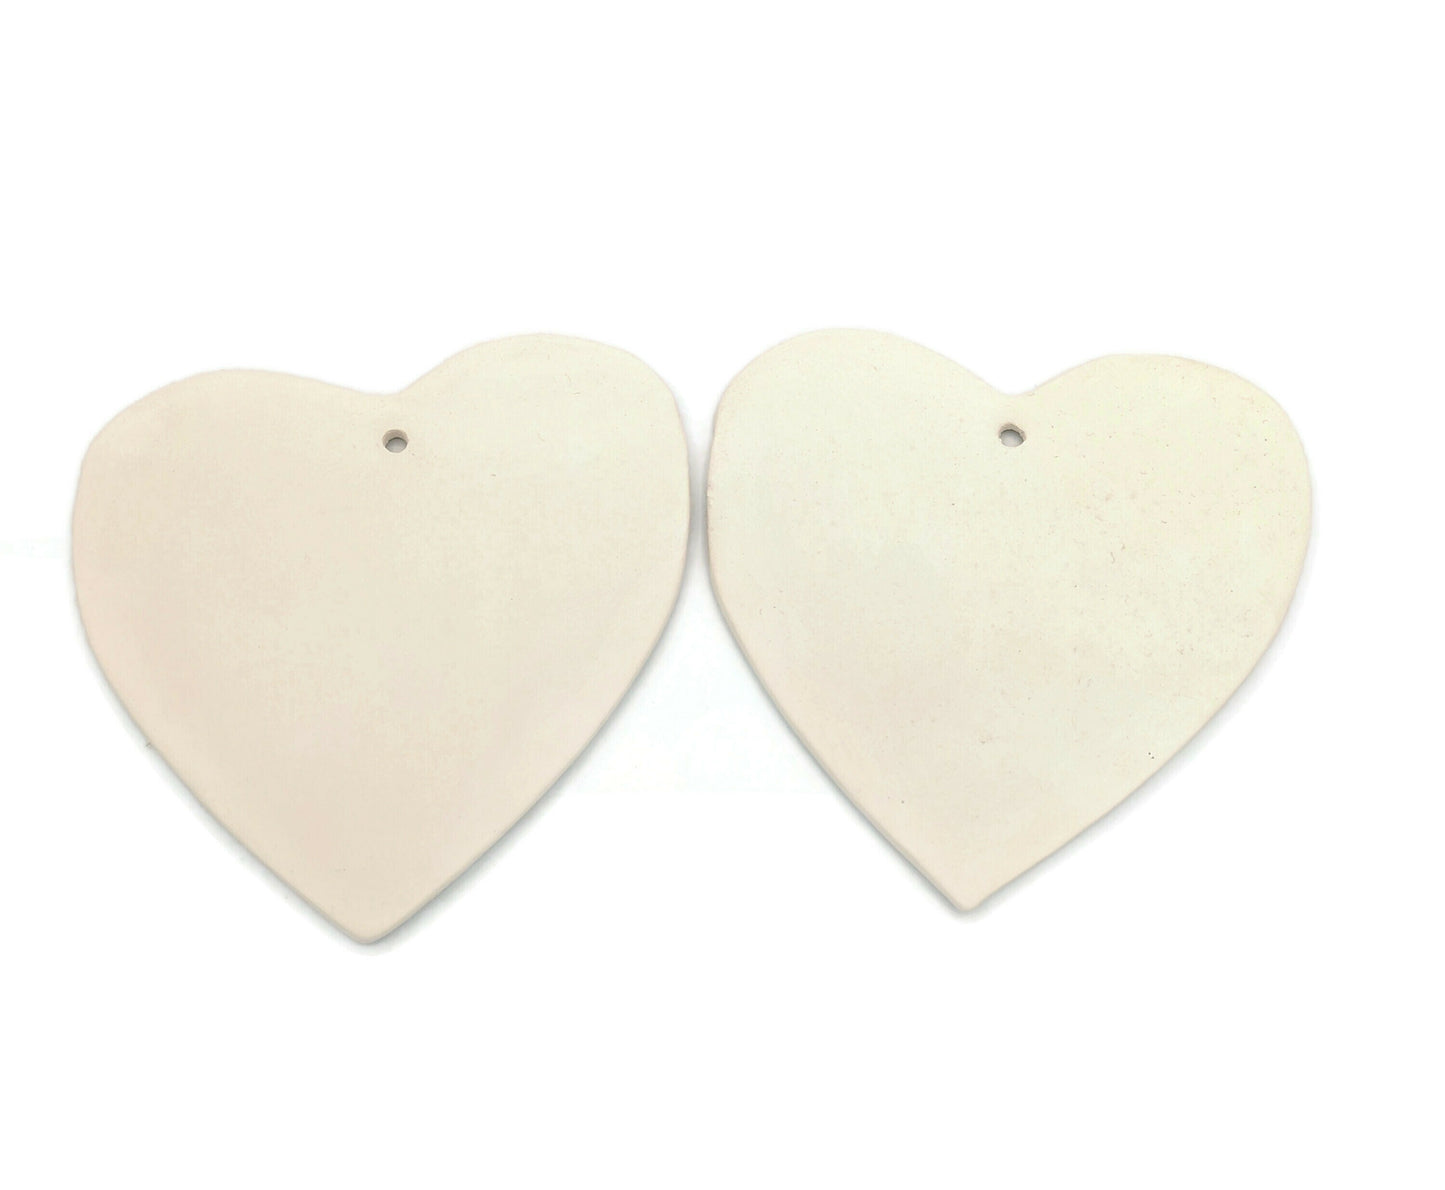 2Pc blank ceramic heart ornament, craft kits for adults, unpainted ceramic bisque ready to paint, best sellers cute DIY gifts for mom - Ceramica Ana Rafael